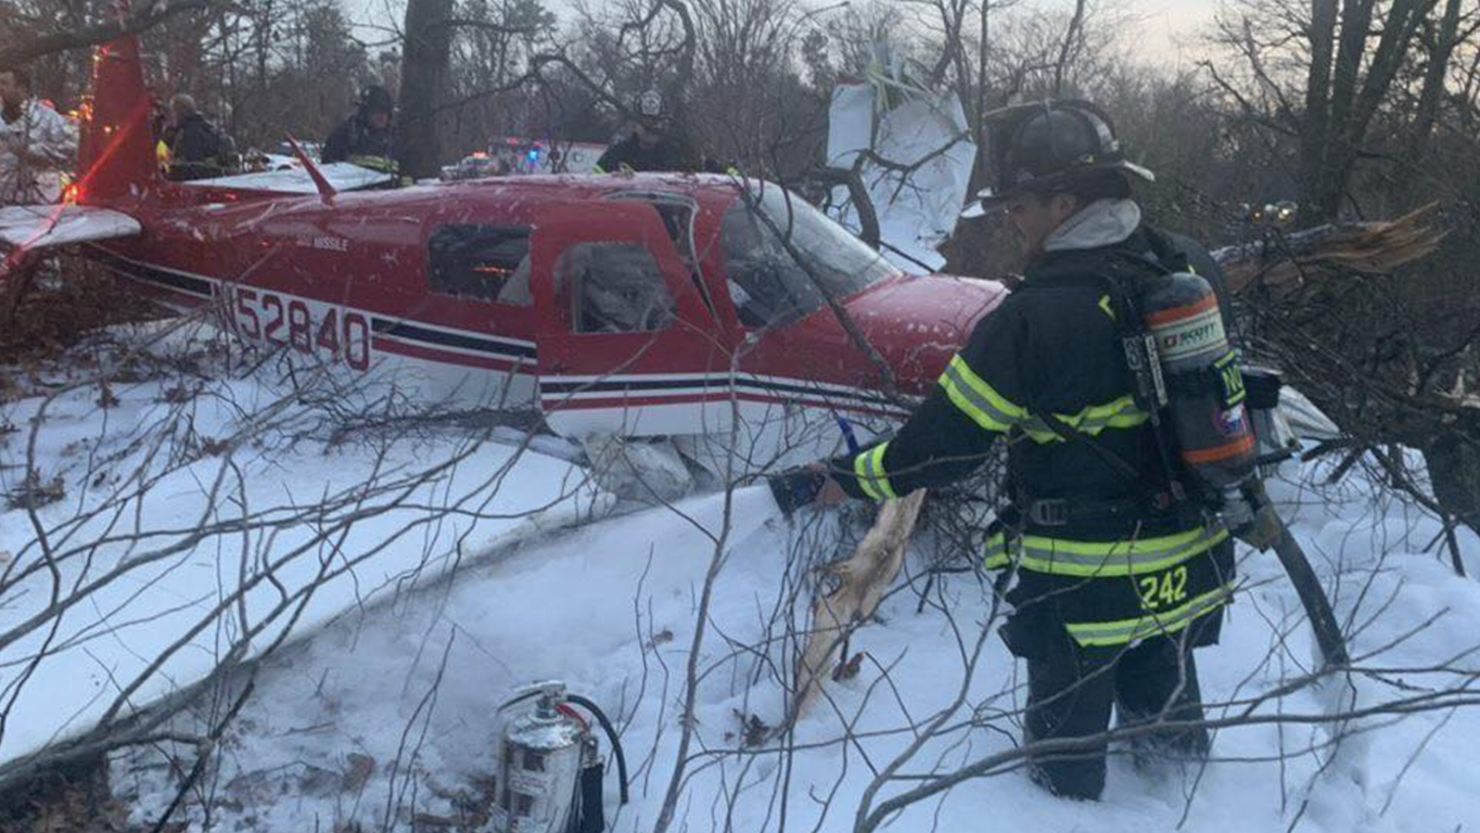 A small plane crashed in East Farmingdale, Long Island, Saturday, December 28, 2019. 